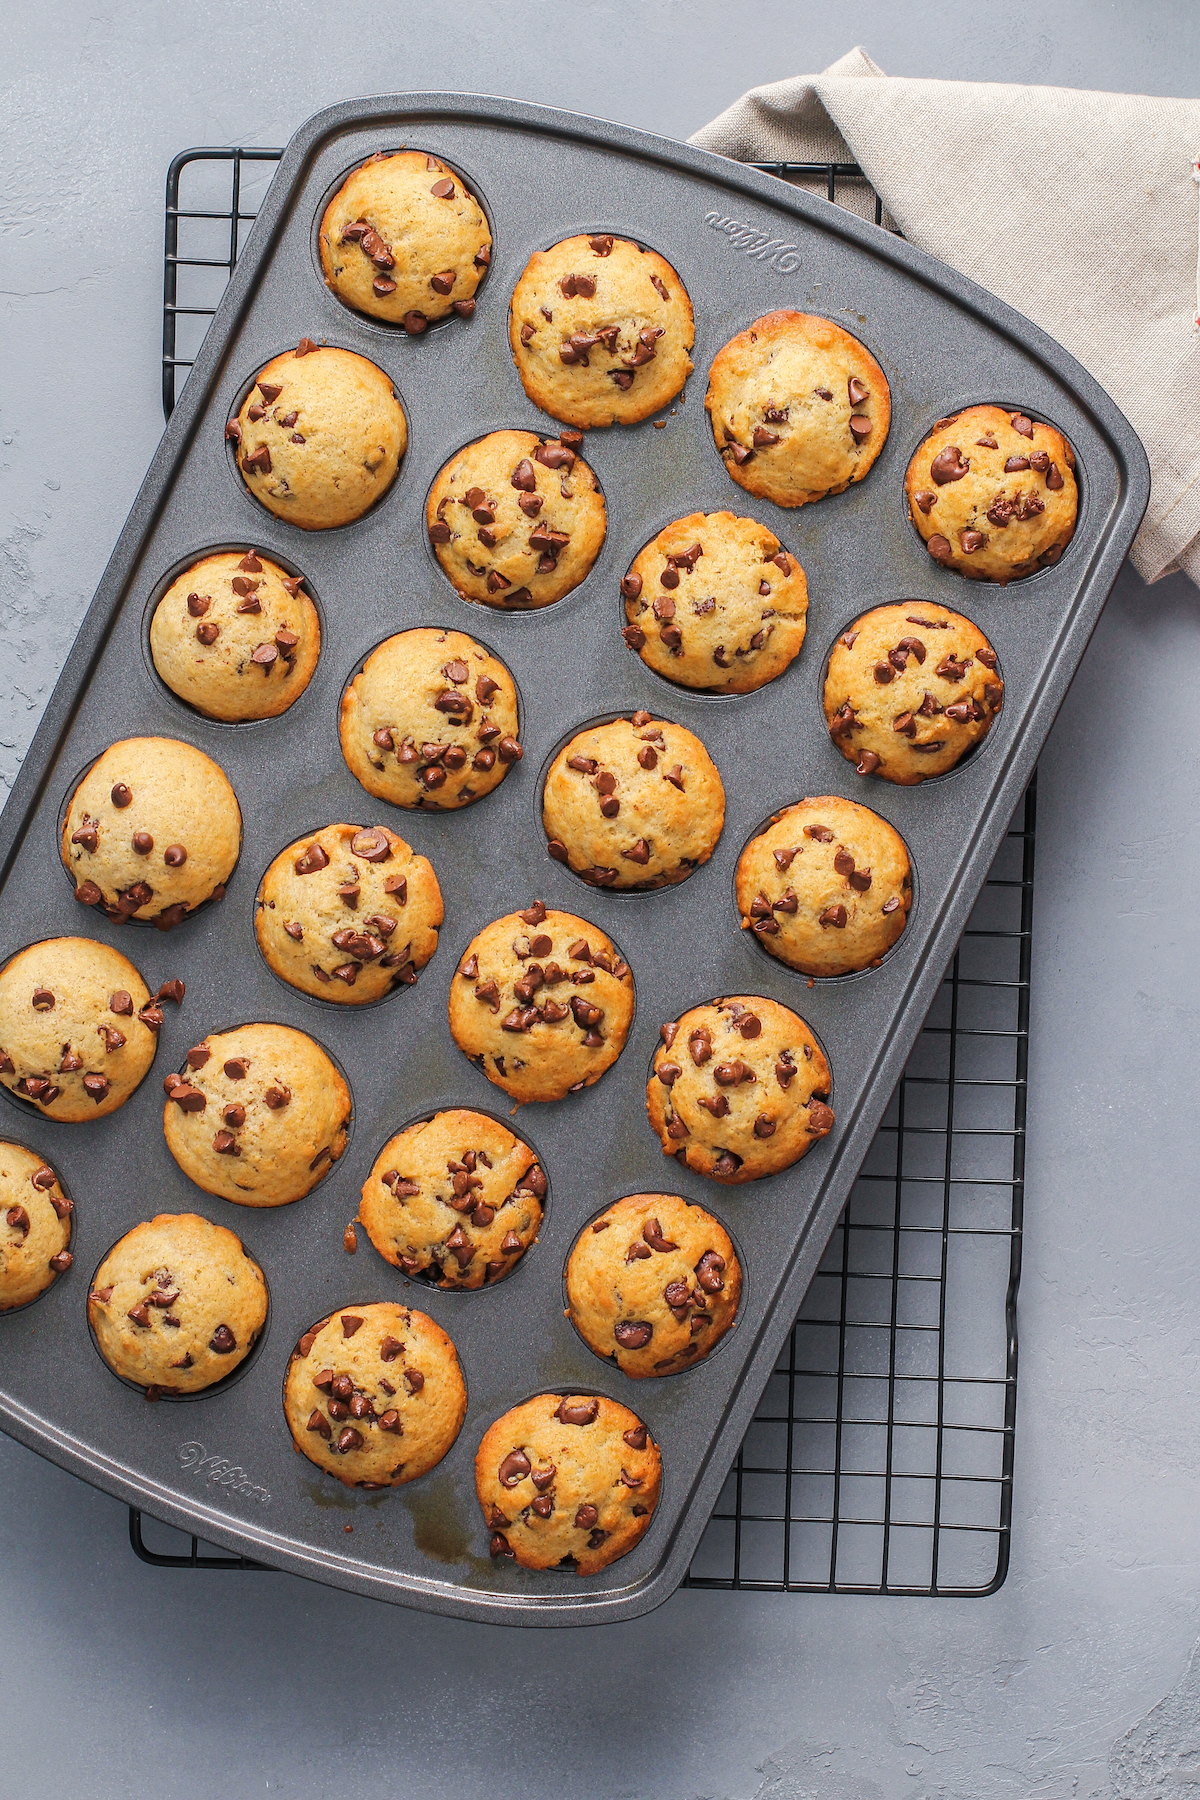 Baked muffins in a tin.